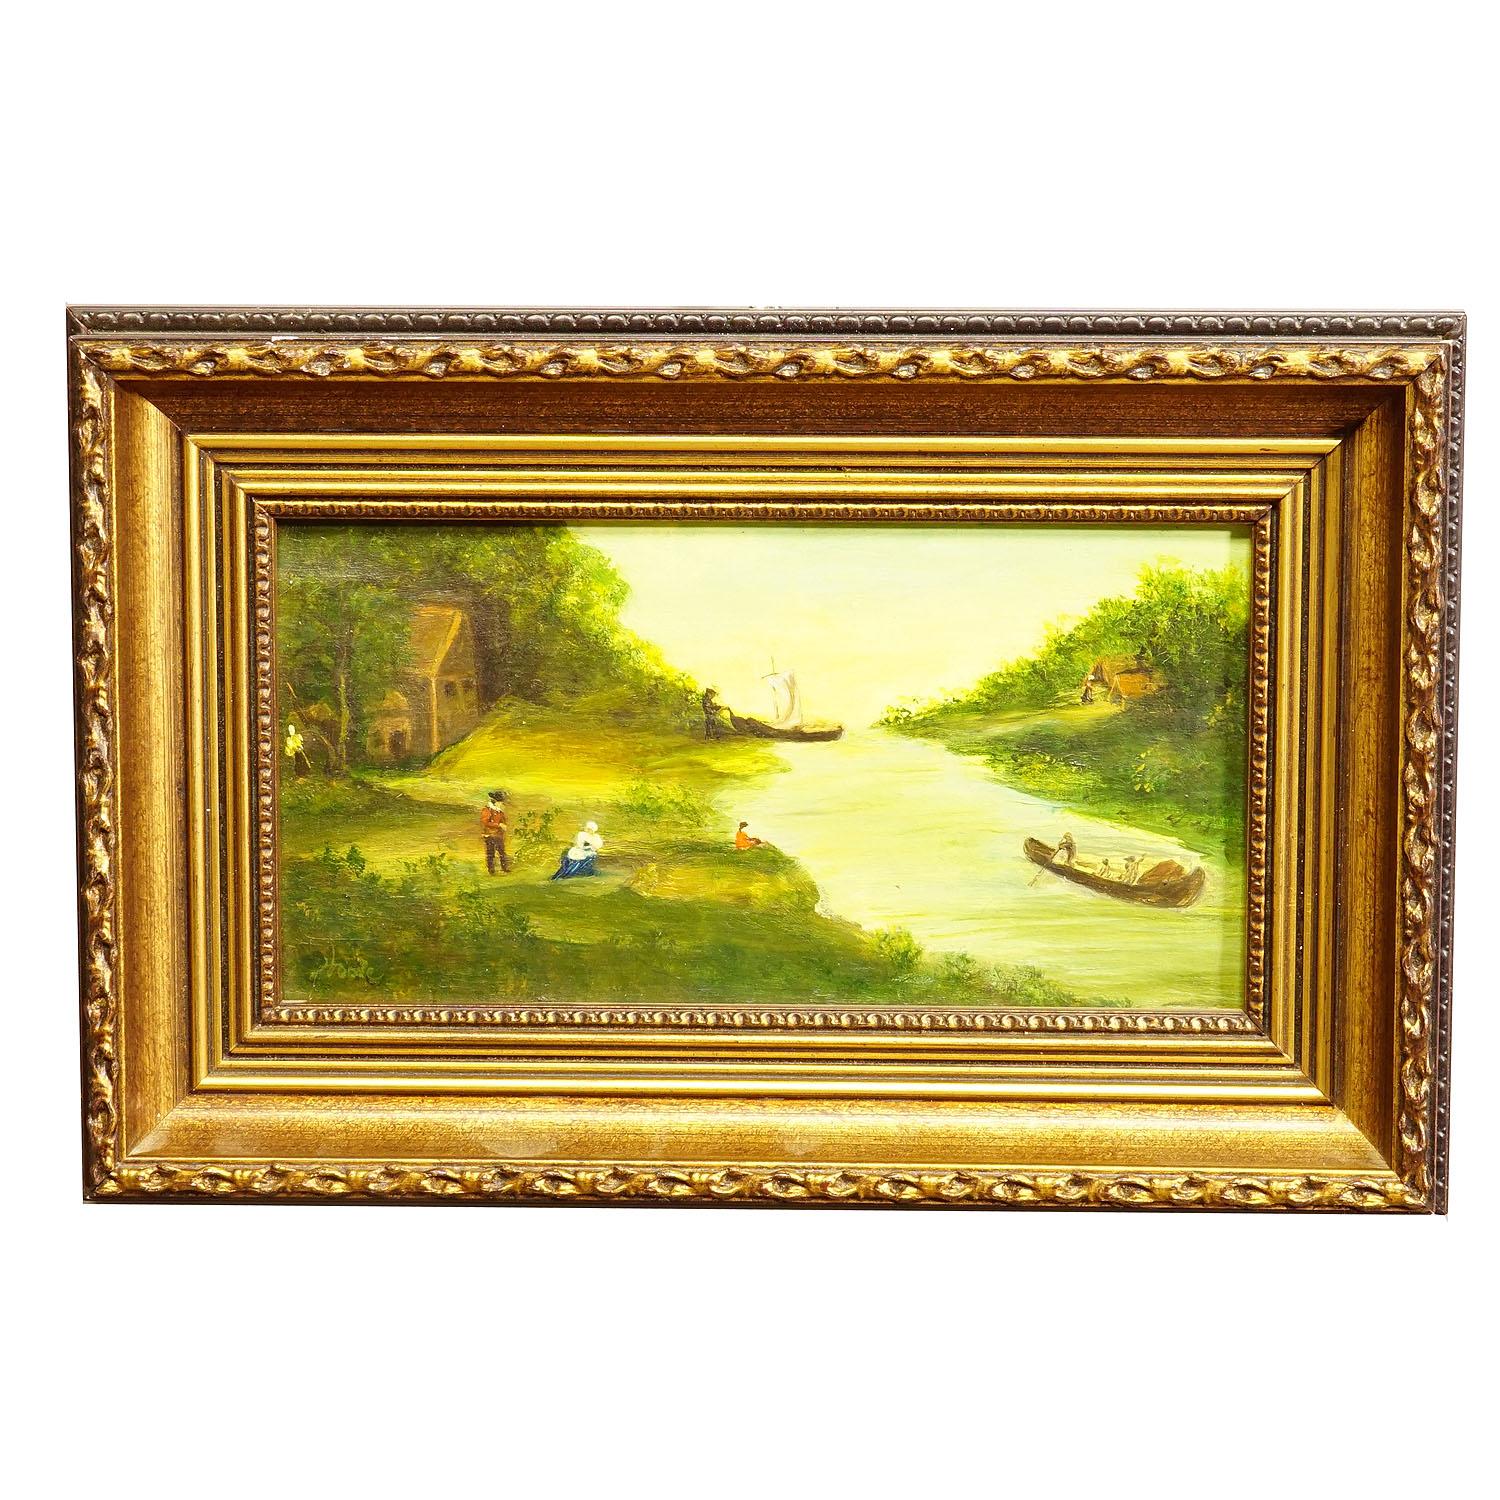 Vintage Oil Painting Victorian River Landscape

A lovely vintage oil painting depicting a Victorian riverside landscape with boats on the river and people on the bank. Painted in bright colors on canvas in Germany 1st half of the 20th century.